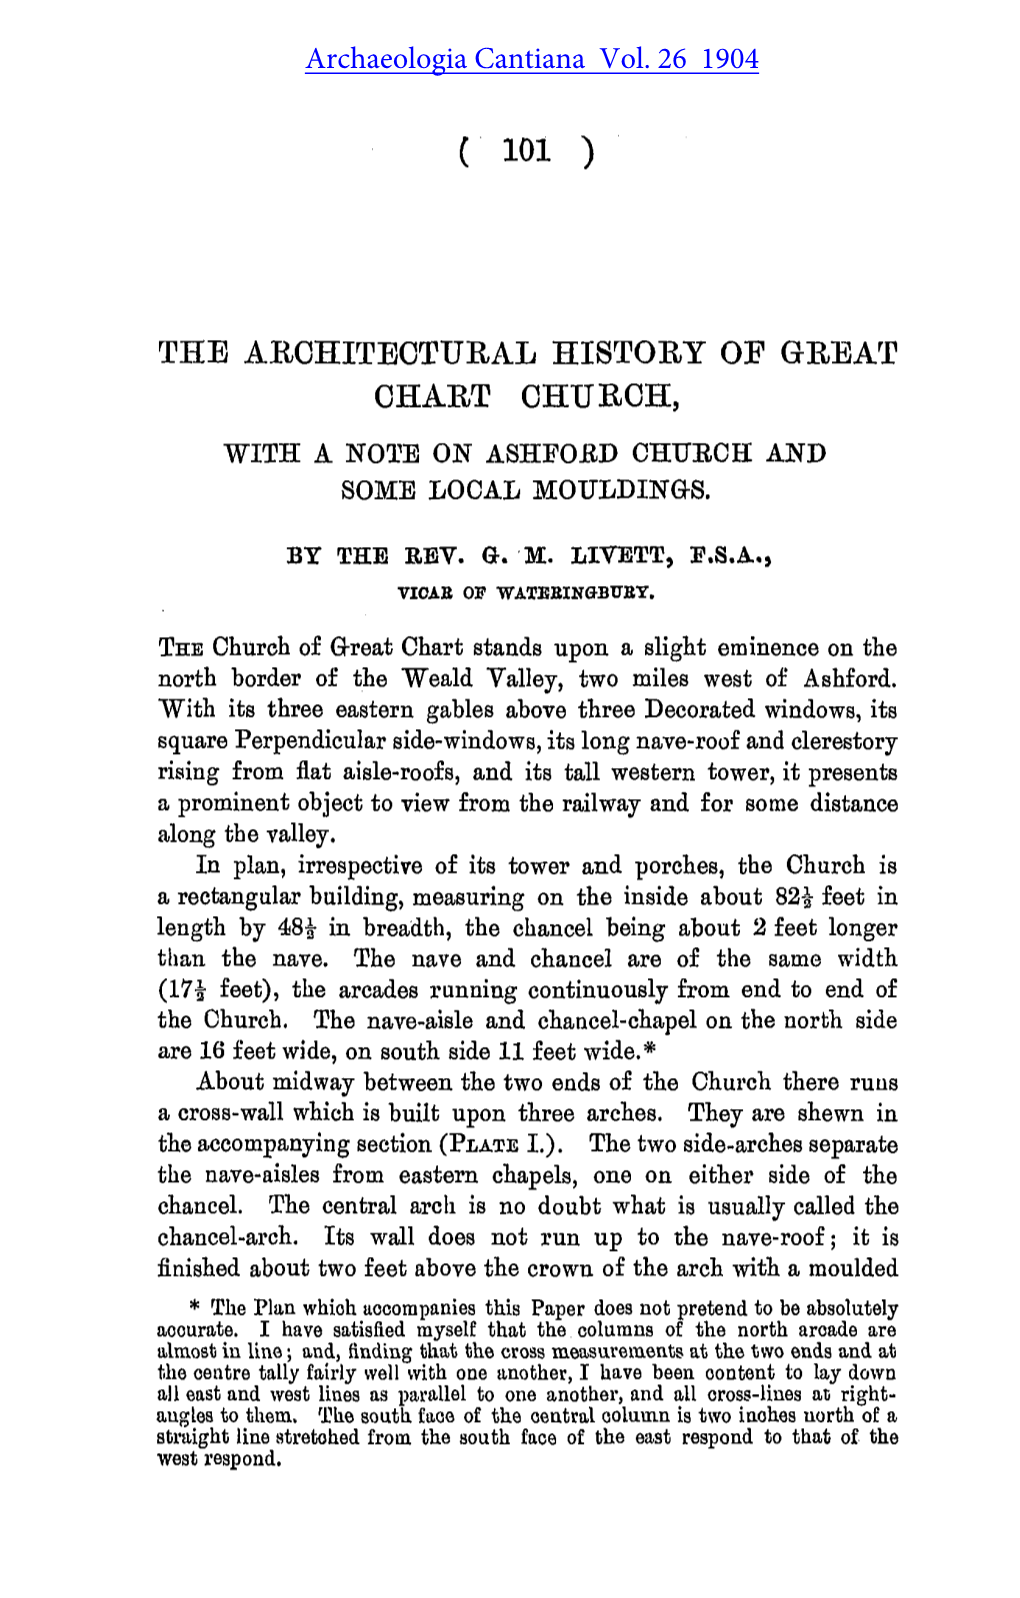 The Architectural History of Great Chart Church, with a Note on Ashfoed Chuech and Some Local Mouldinq-S